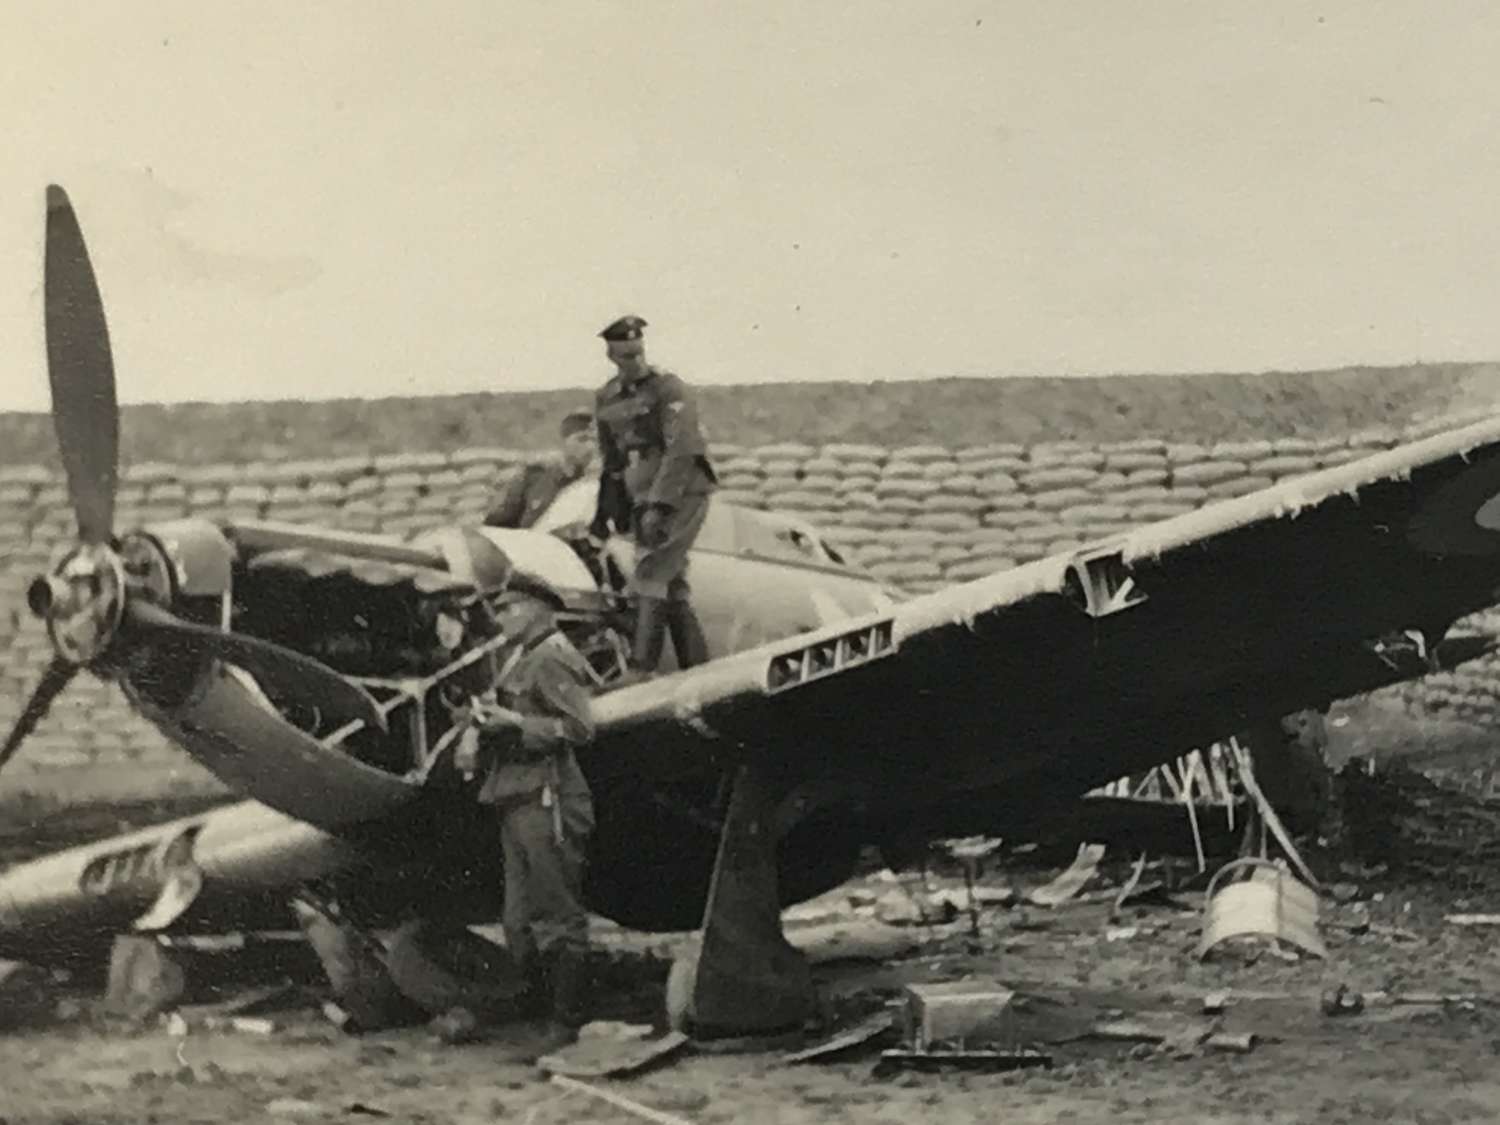 Photograph of hurricane fighter being inspected by SS troops